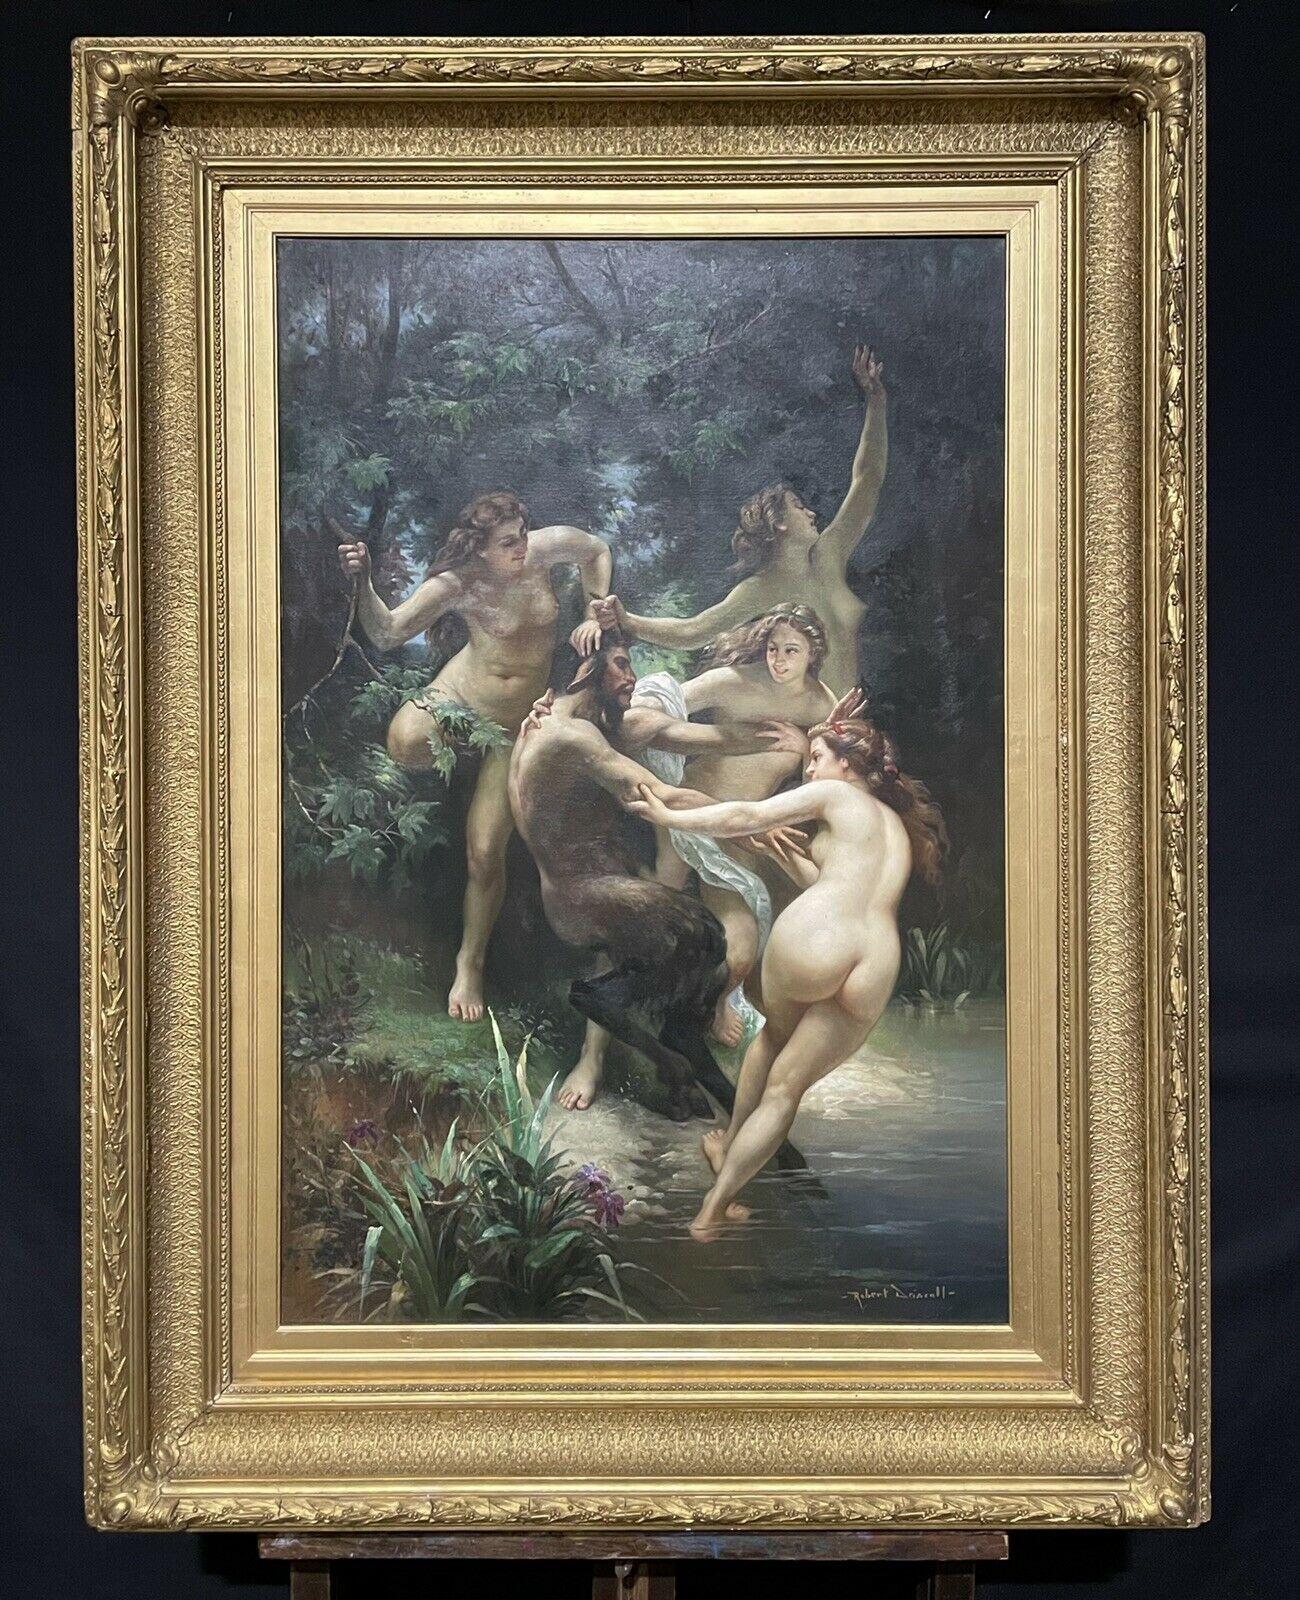 HUGE SIGNED OIL PAINTING ANTIQUE GILT FRAME - NYMPHS & SATYR AFTER BOUGUEREAU - Painting by Robert Driscoll